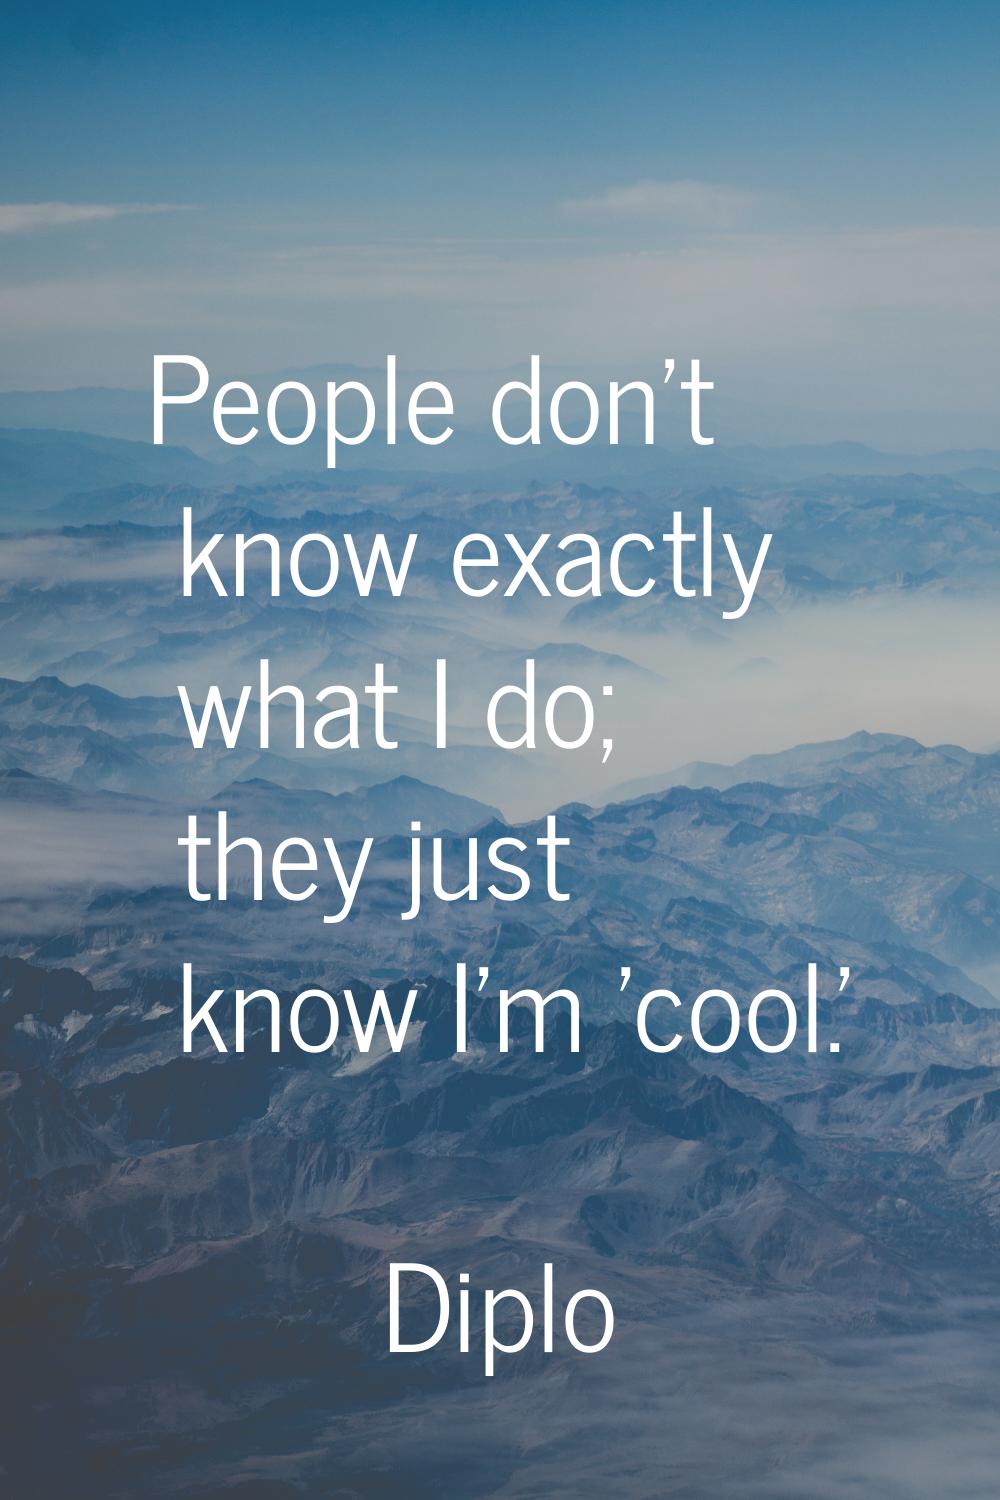 People don't know exactly what I do; they just know I'm 'cool.'